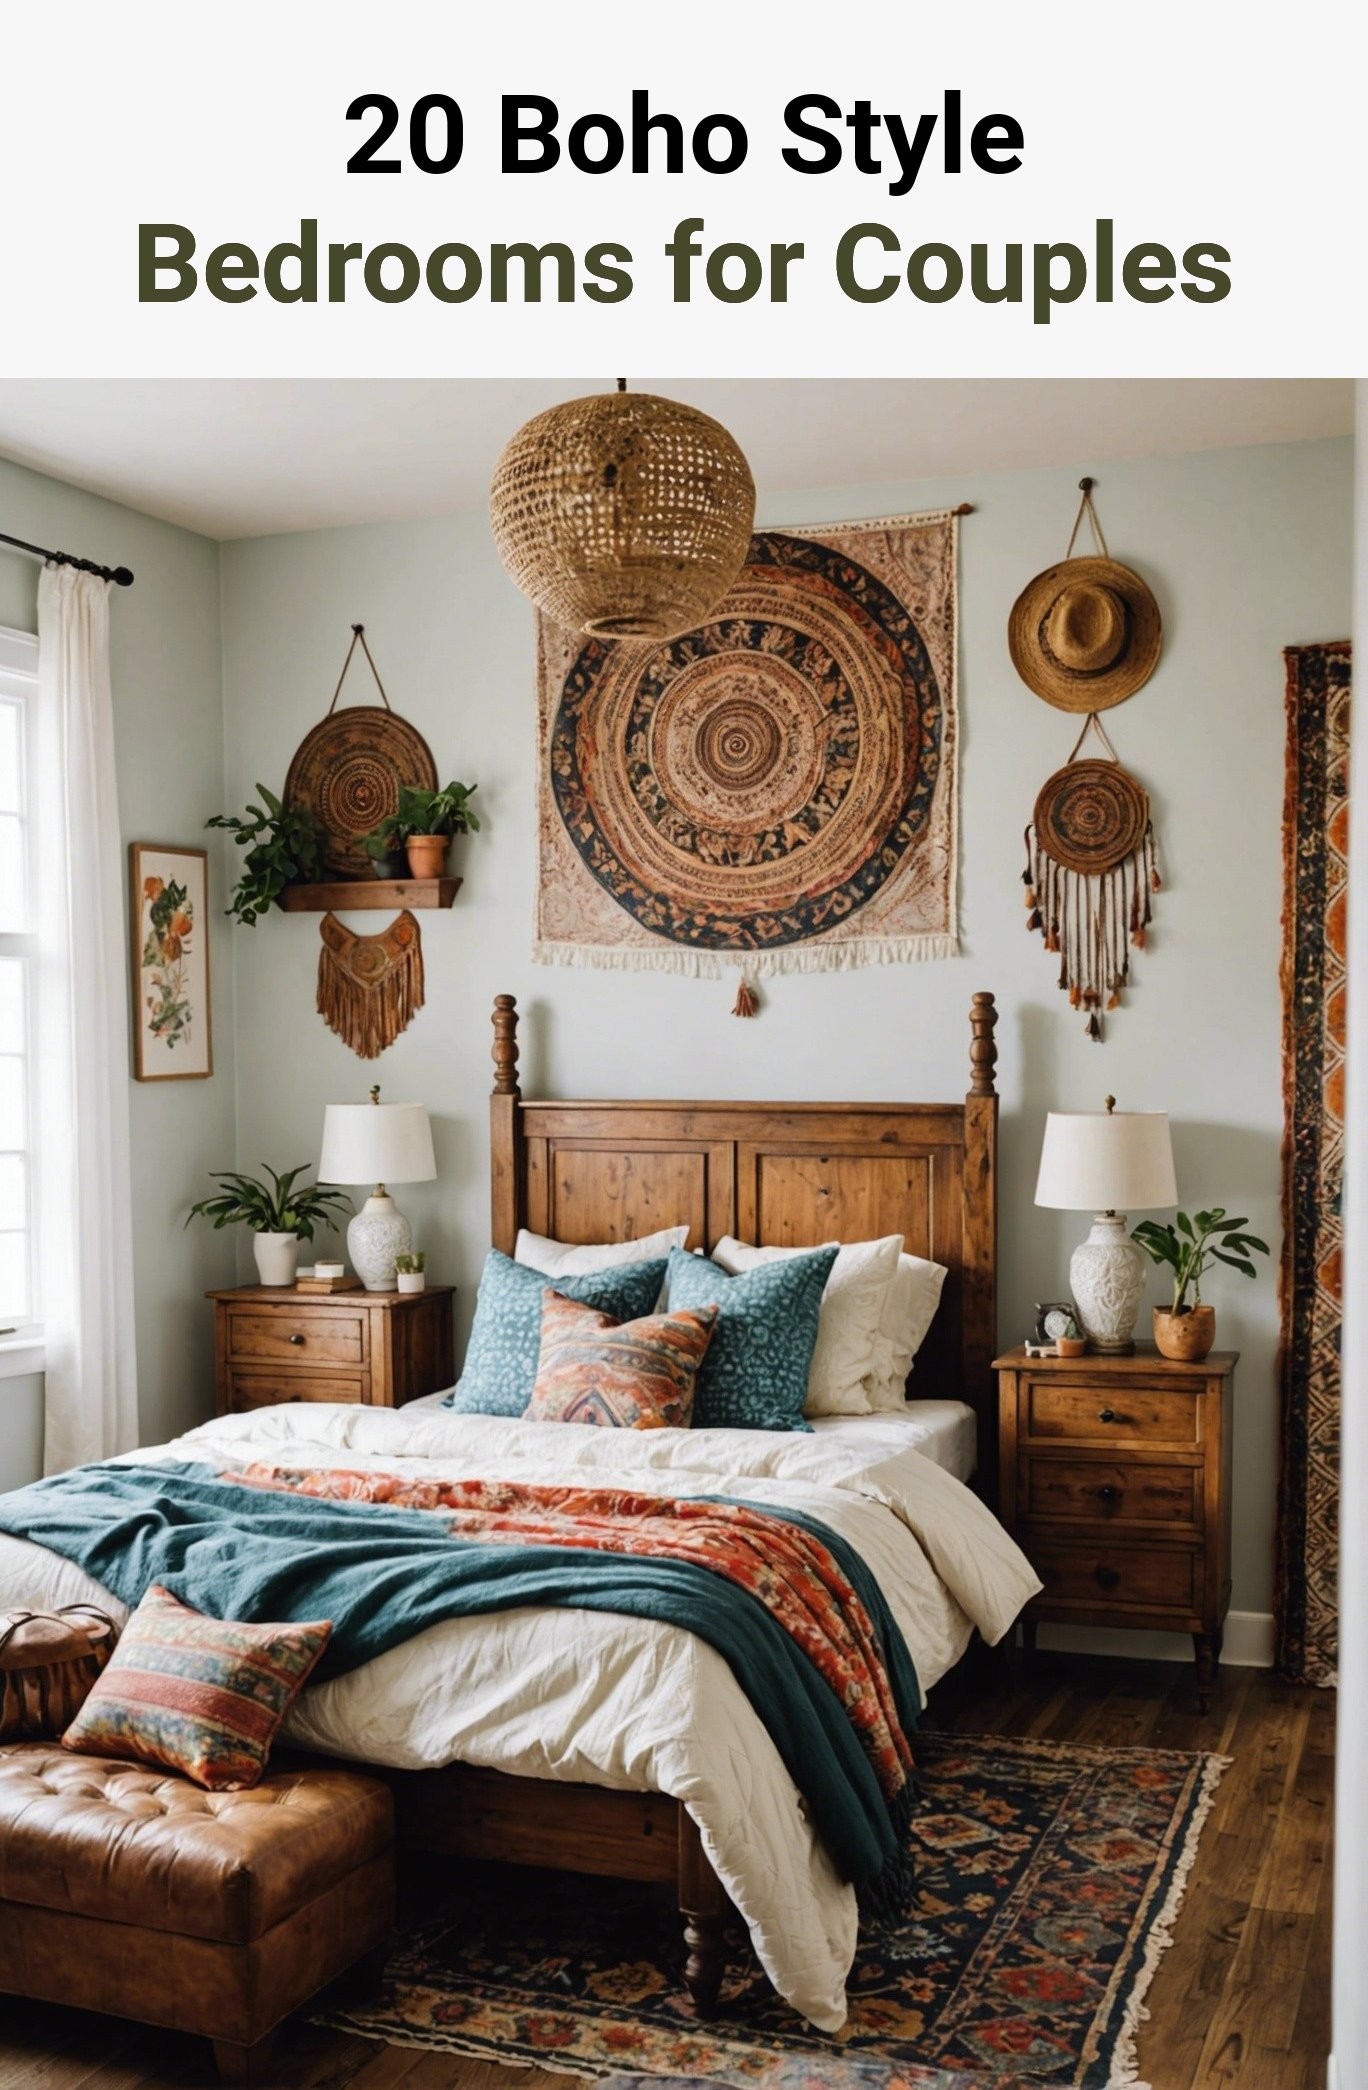 20 Boho Style Bedrooms for Couples